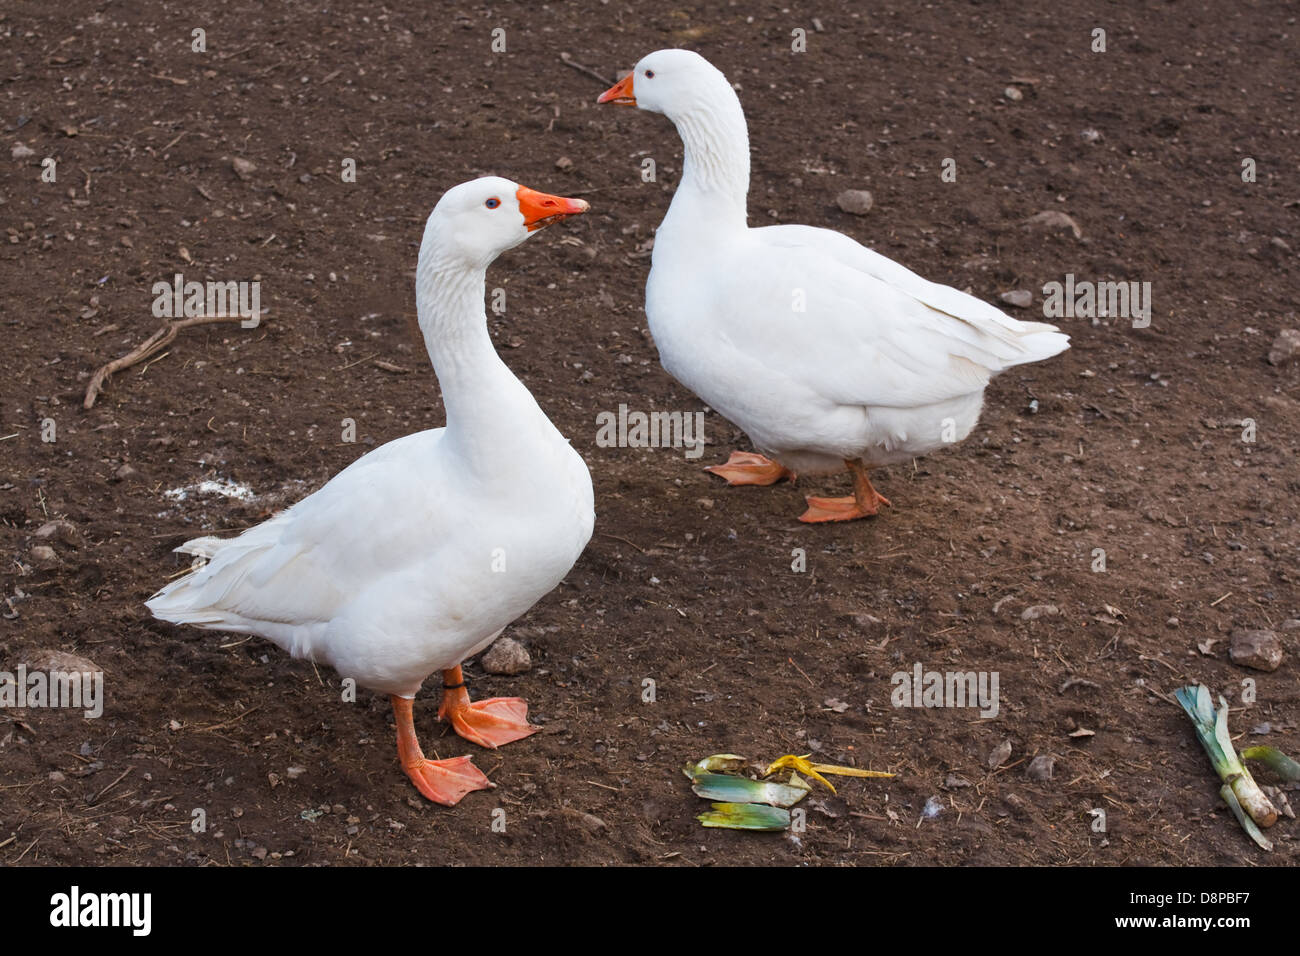 Two domestic geese often farmed for meat, eggs and down pillow feathers Stock Photo